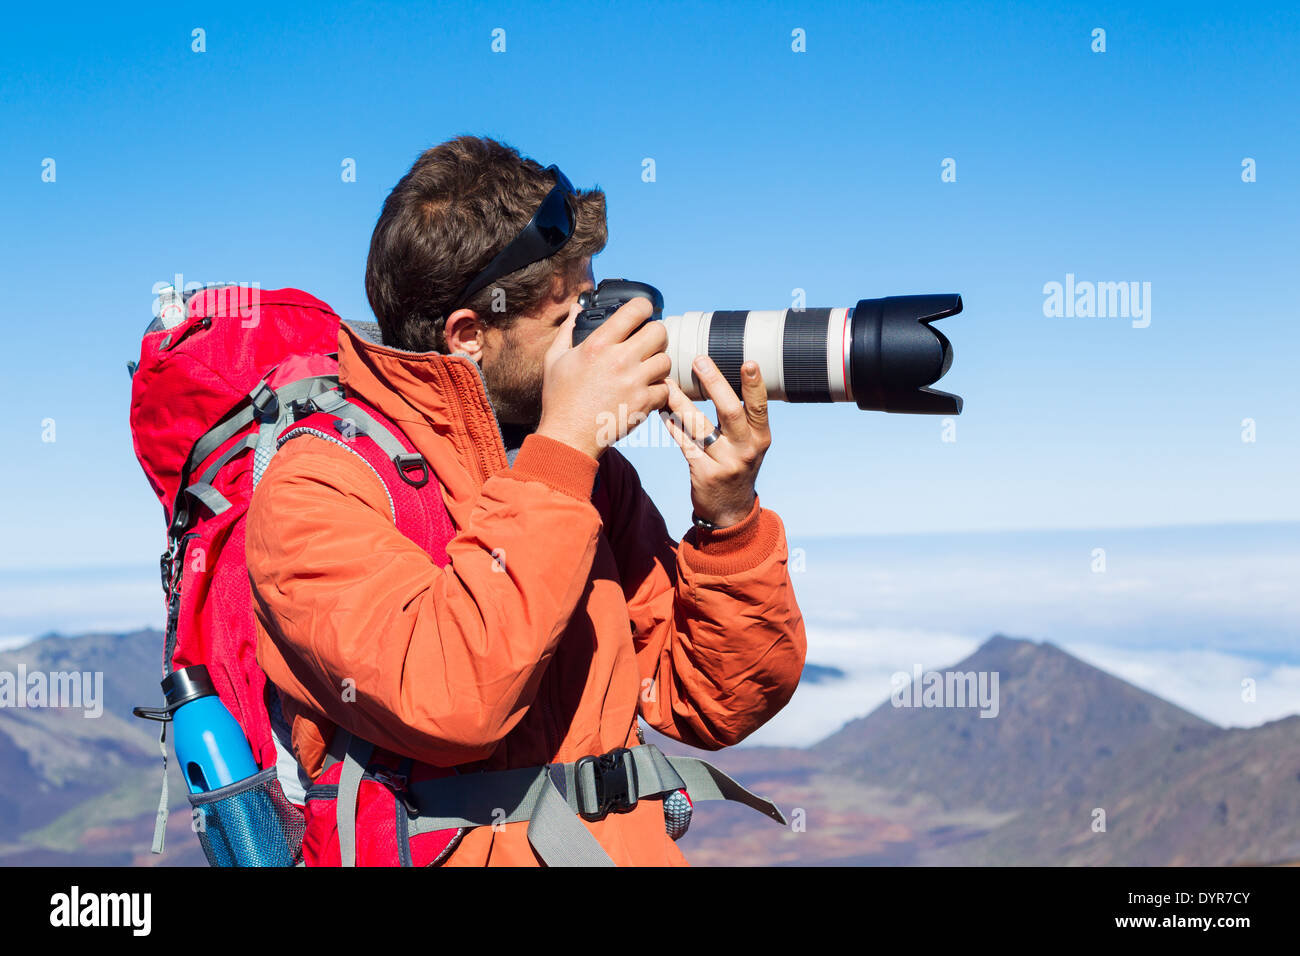 Photographer taking pictures outdoors on hiking trip. Outdoor nature photography. Stock Photo